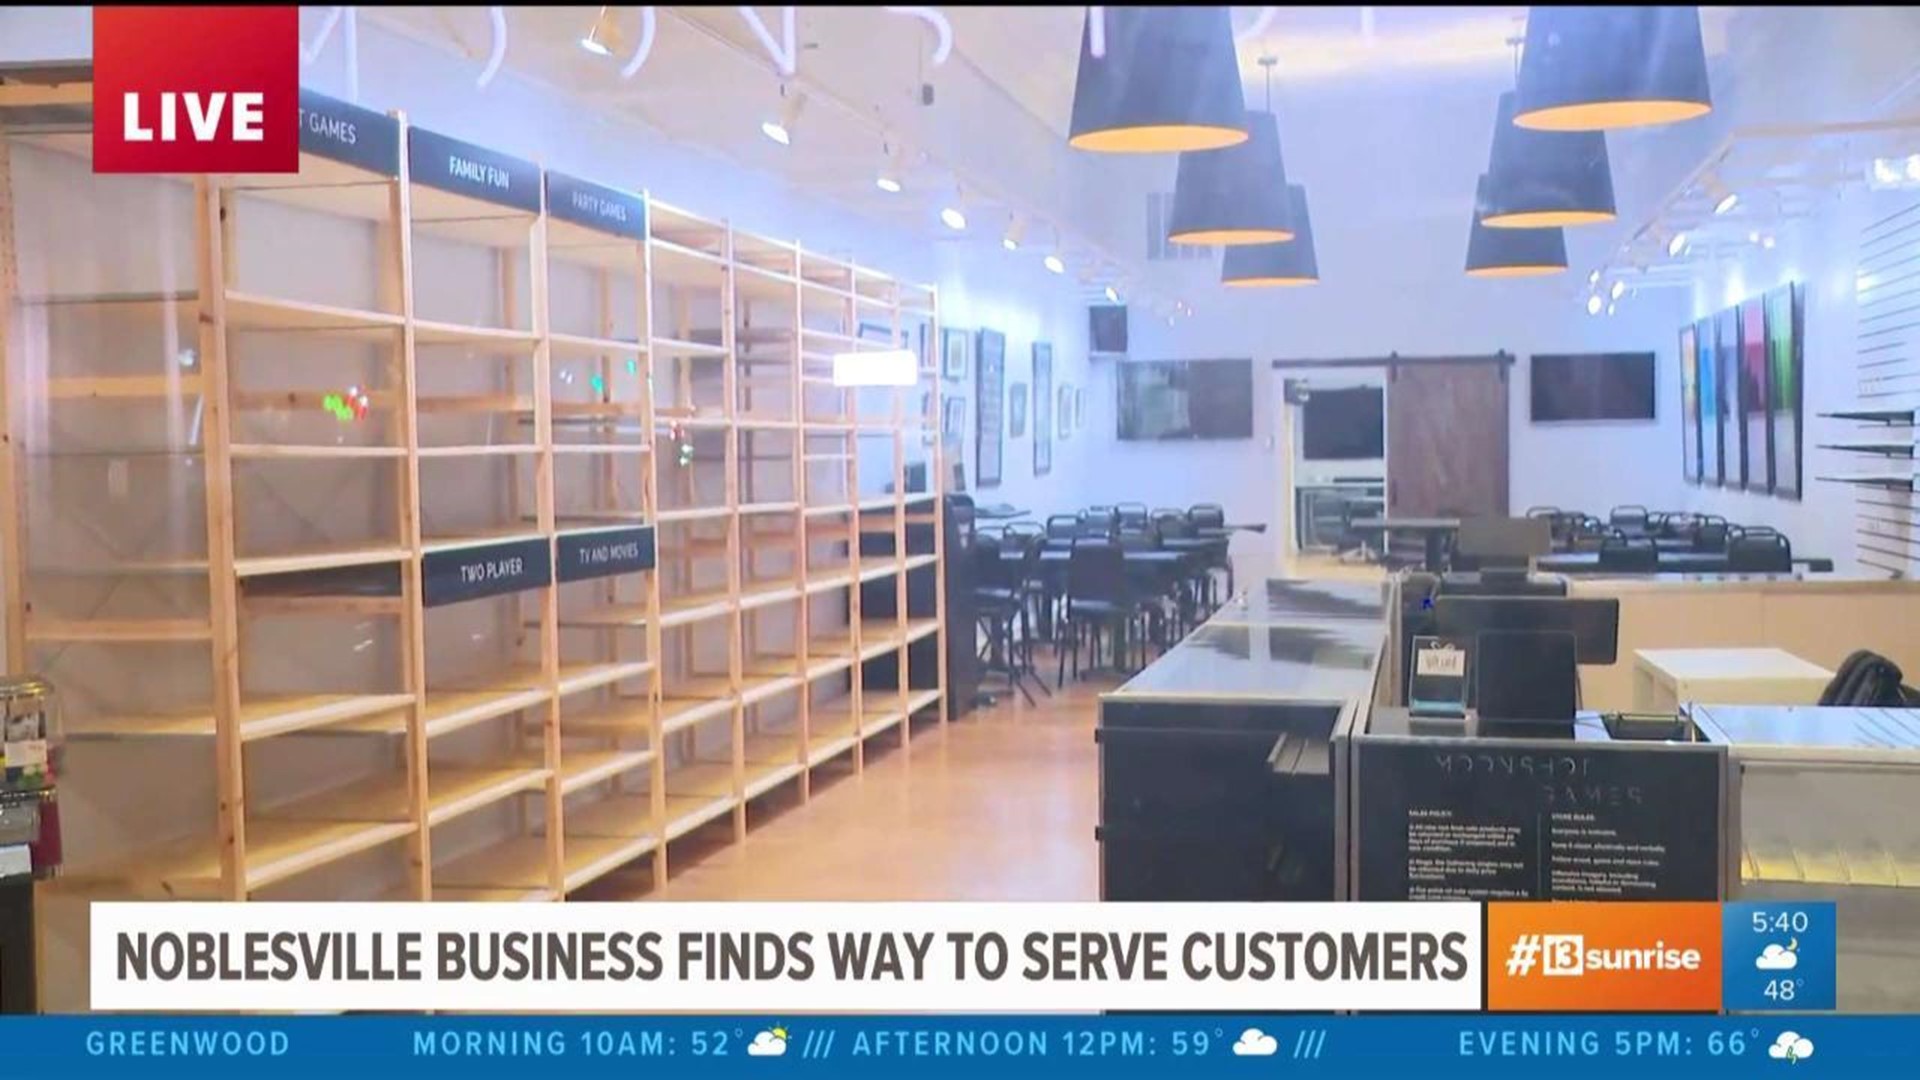 Noblesville business finds way to serve customers 1